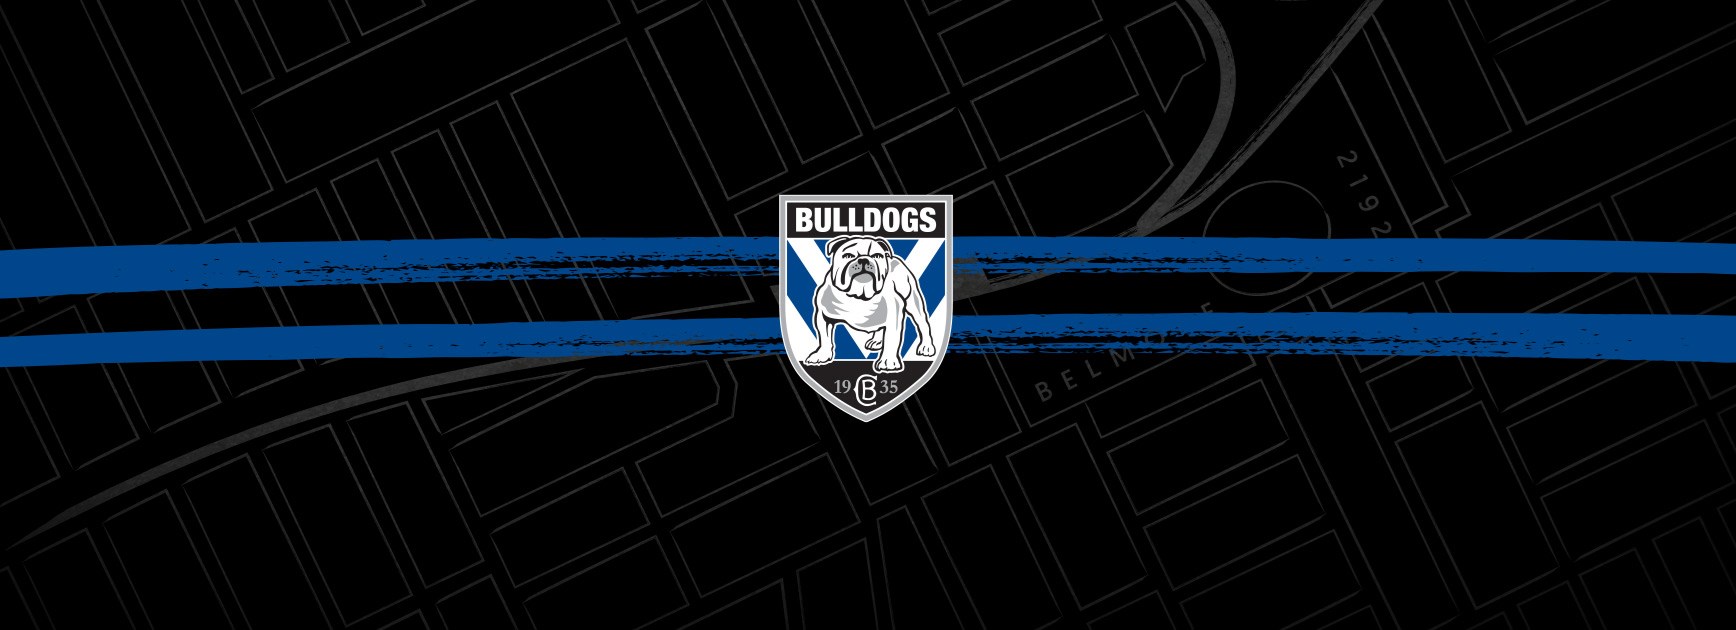 Bulldogs to create joint venture with Mounties for next two seasons